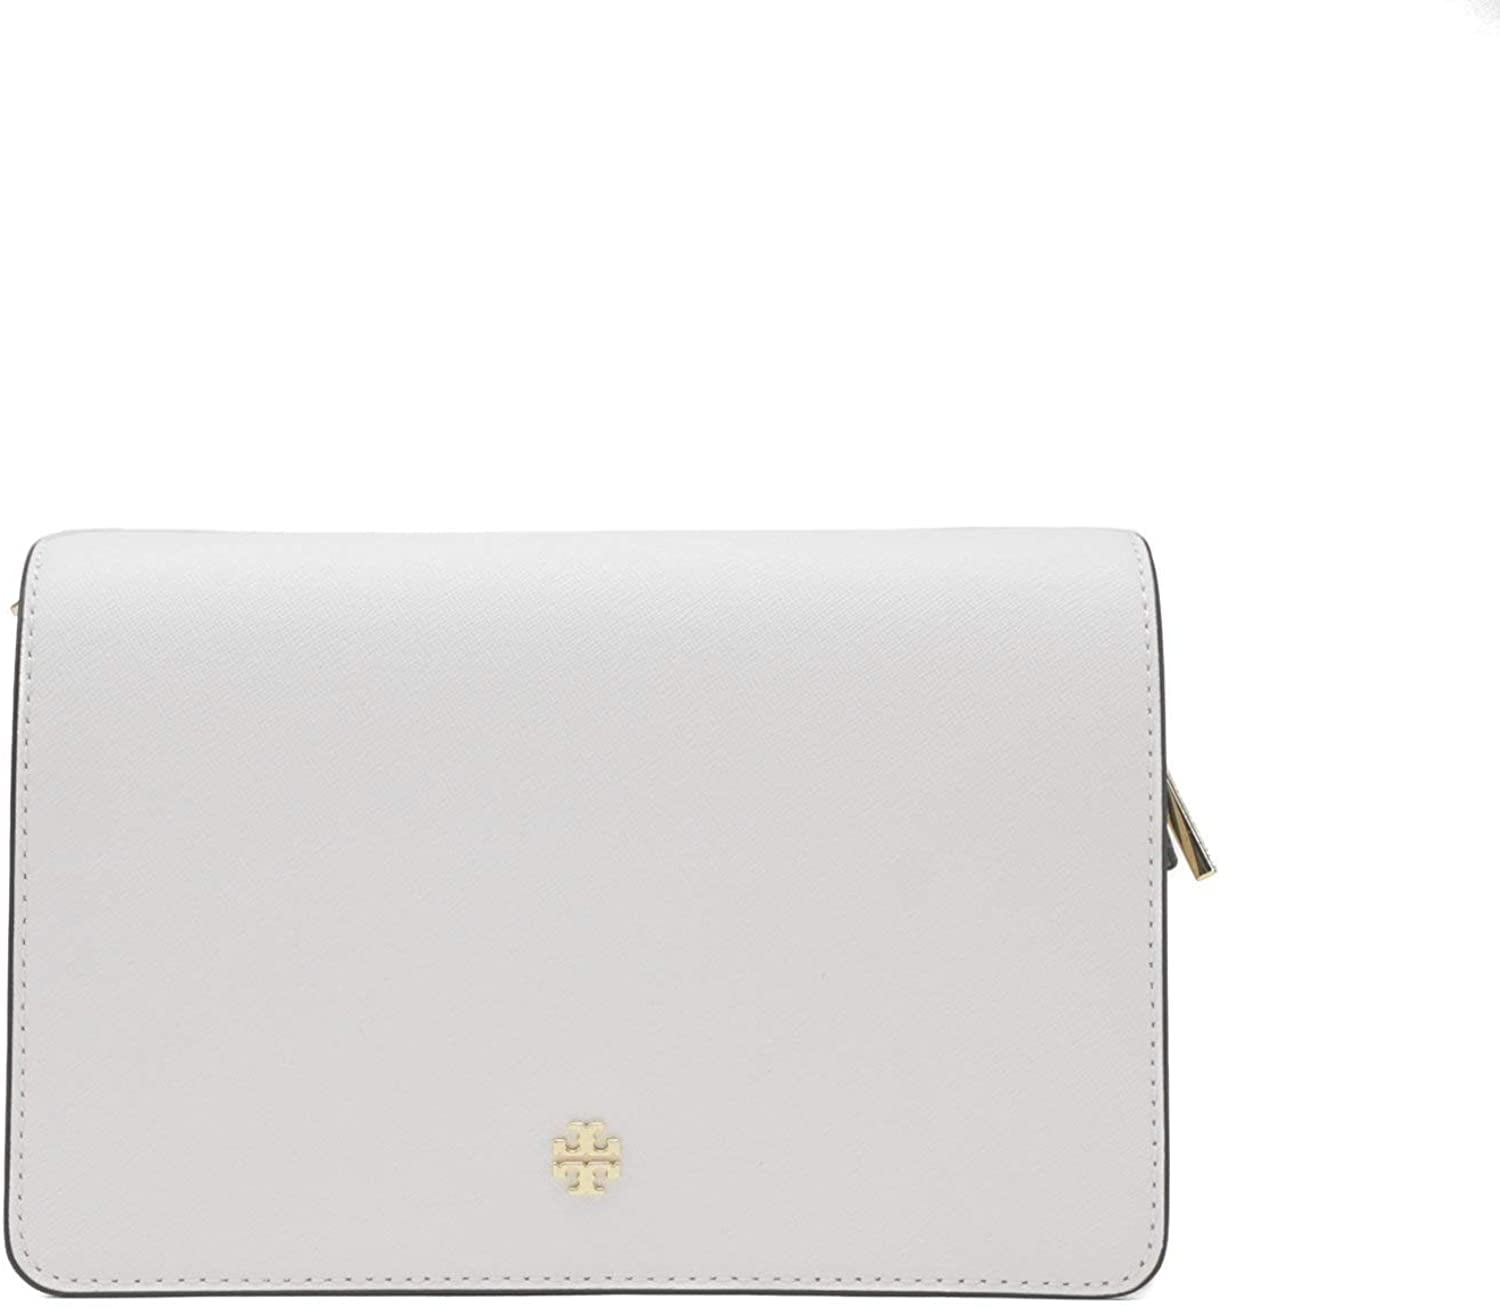 Tory Burch Emerson Combo Leather Crossbody in New Ivory 